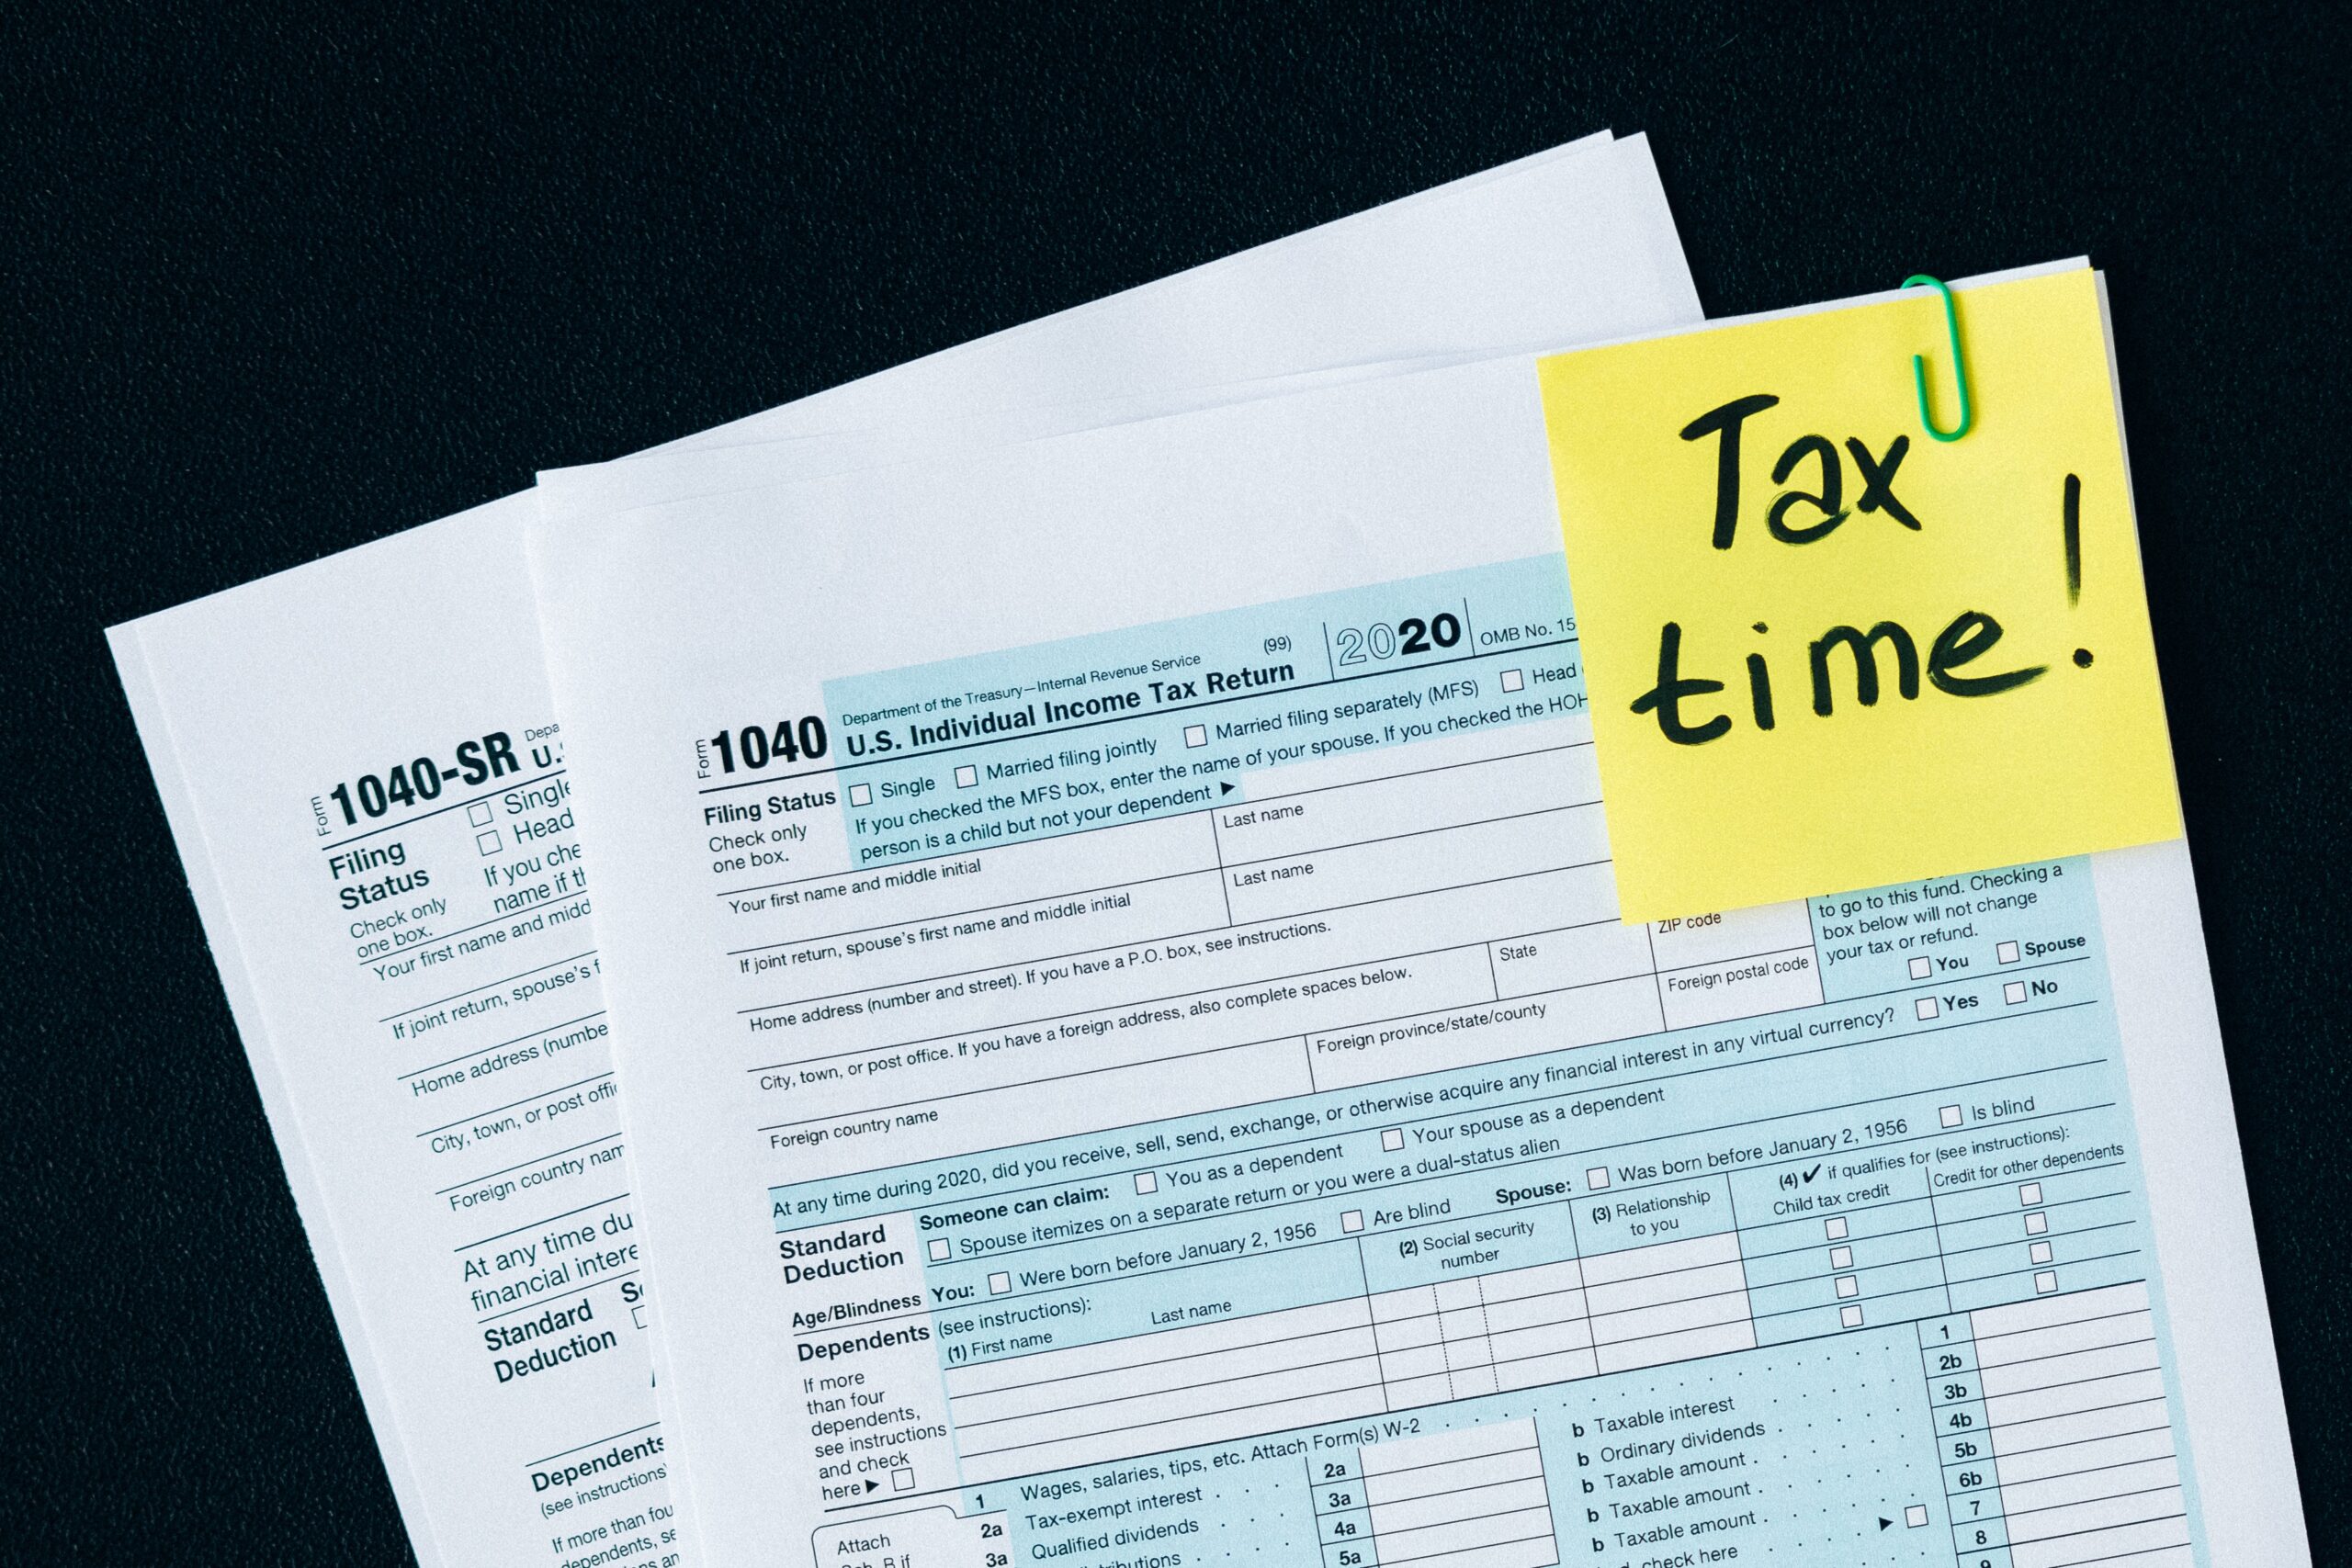 Is It Bad to Get a Large Tax Refund?